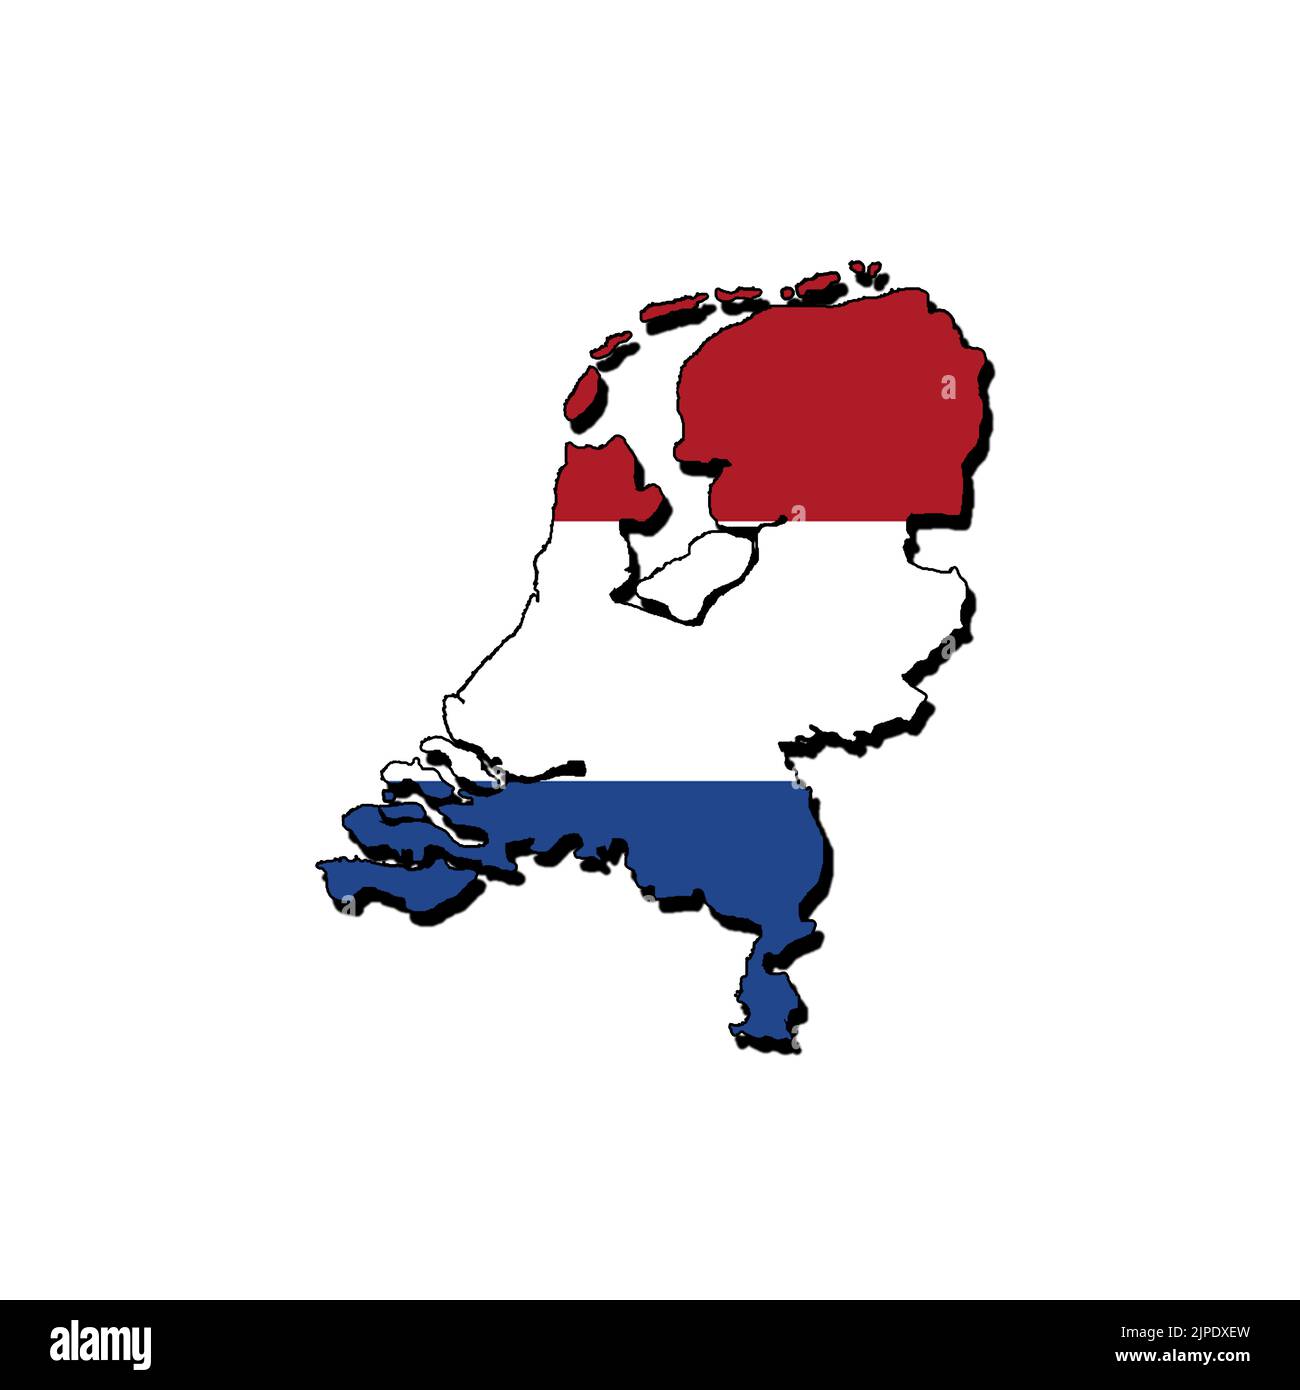 Silhouette of the map of Netherlands with its flag Stock Photo